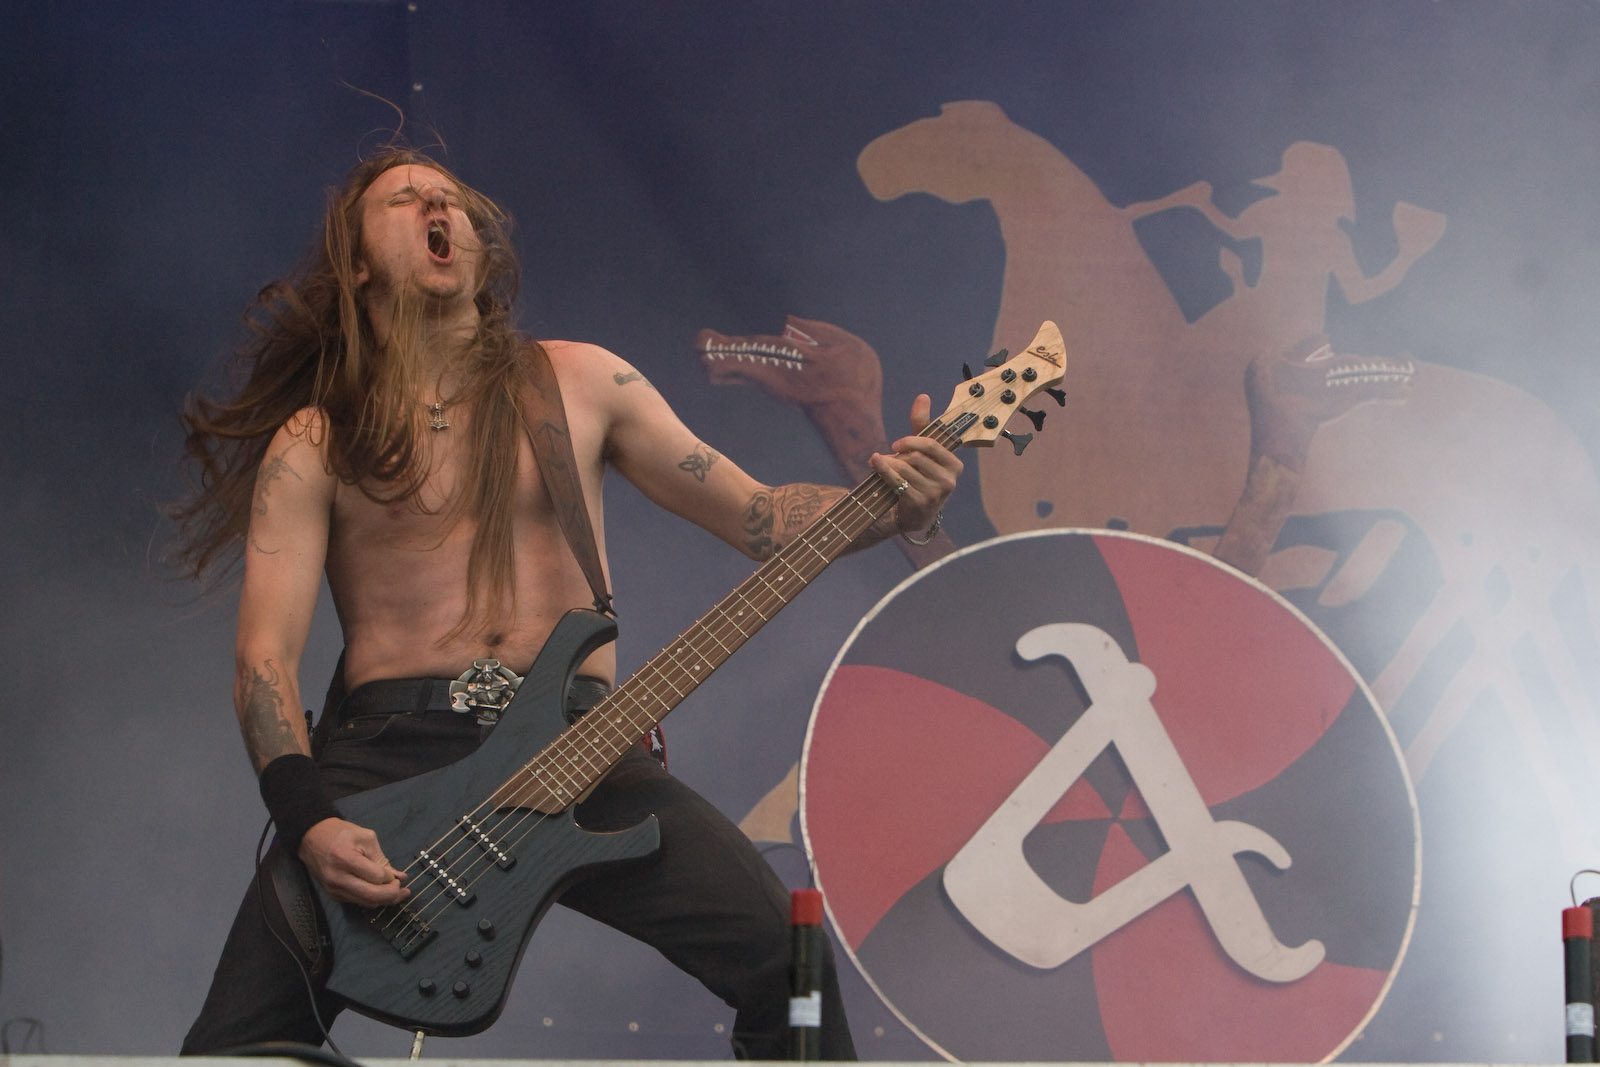 http://upload.wikimedia.org/wikipedia/commons/a/ac/Amon_Amarth-1001-Ted_Lundstr%C3%B6m.jpg